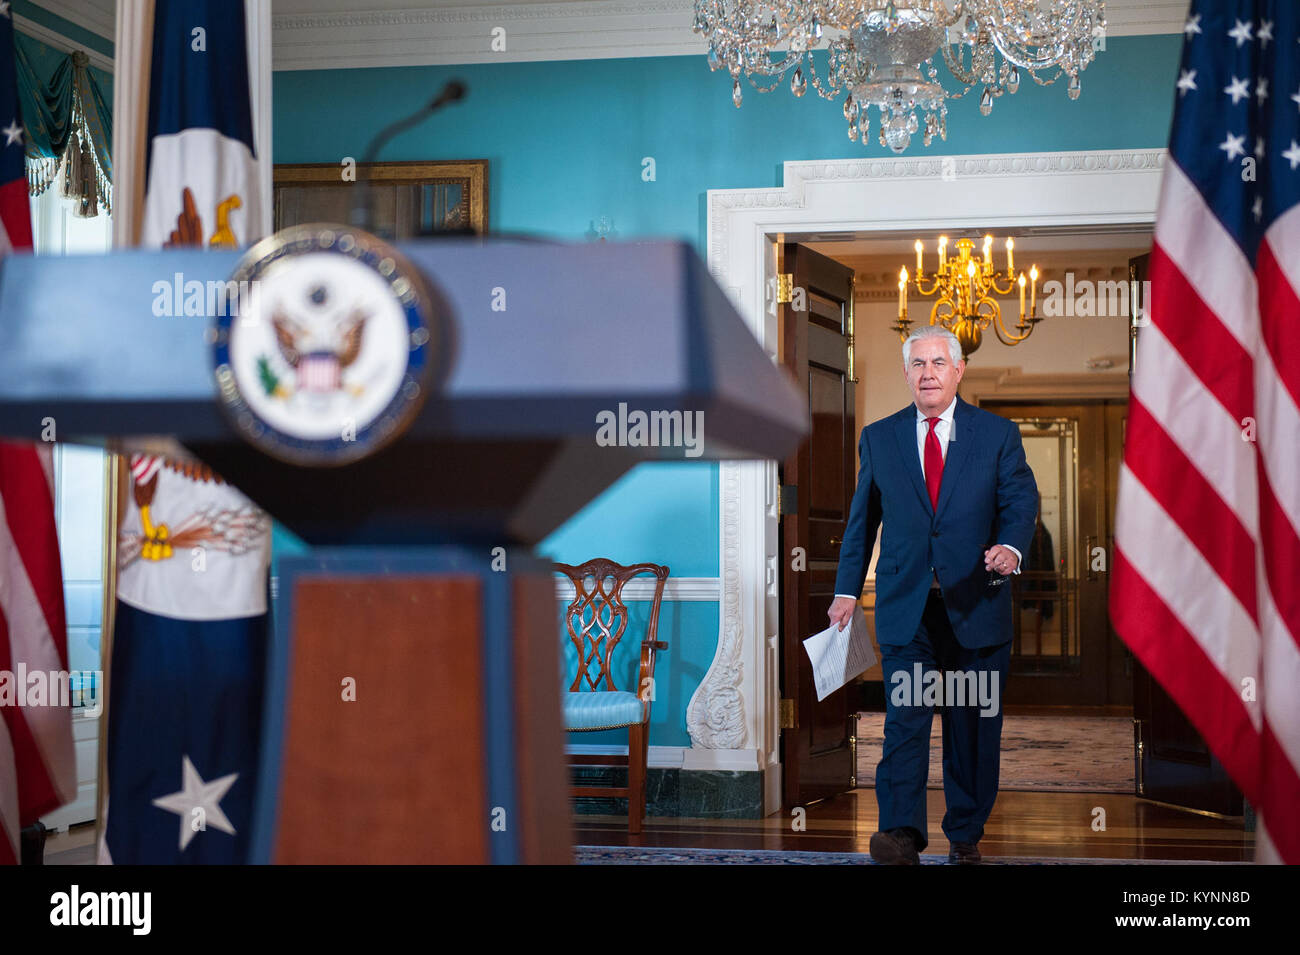 U.S. Secretary of State Rex Tillerson approaches the podium in the Treaty Room to address the media at the U.S. Department of State in Washington, D.C. on October 4, 2017. Stock Photo